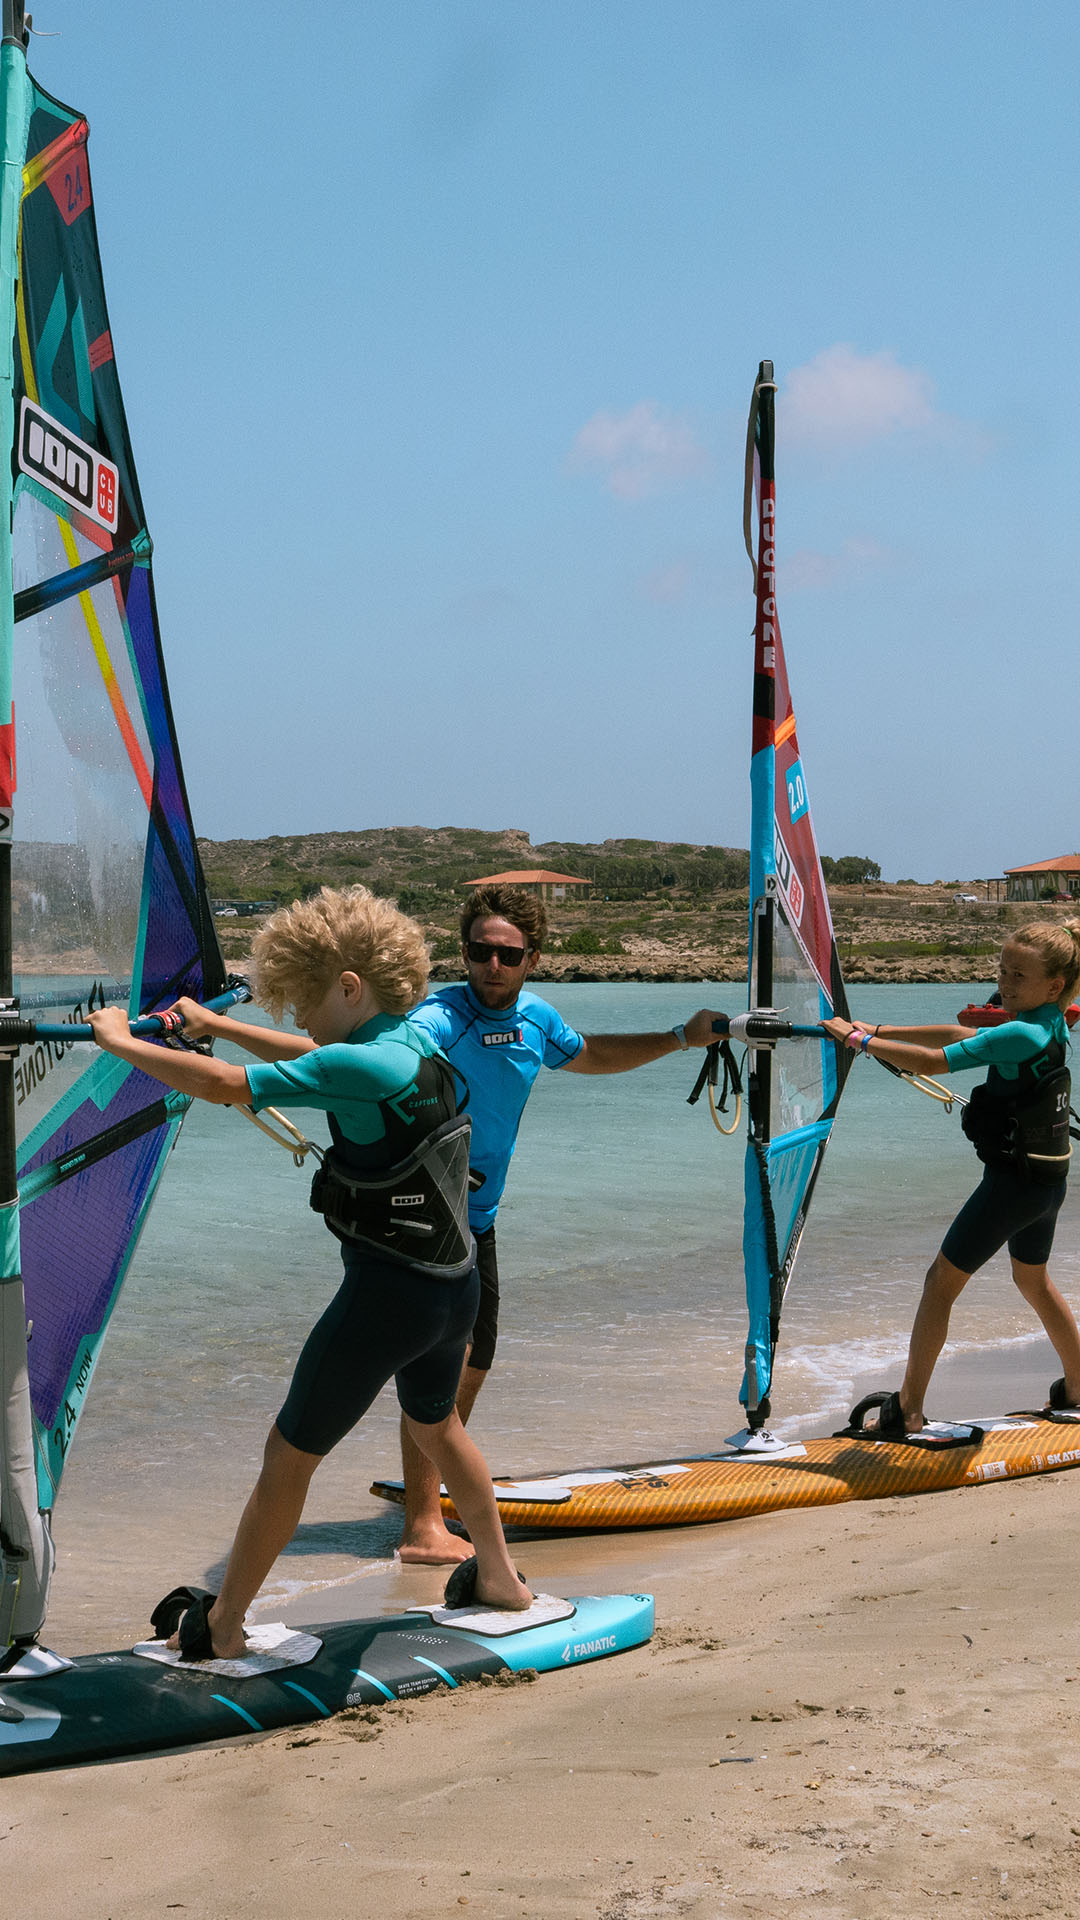 windsurf instructor on the beach with crystal clear water